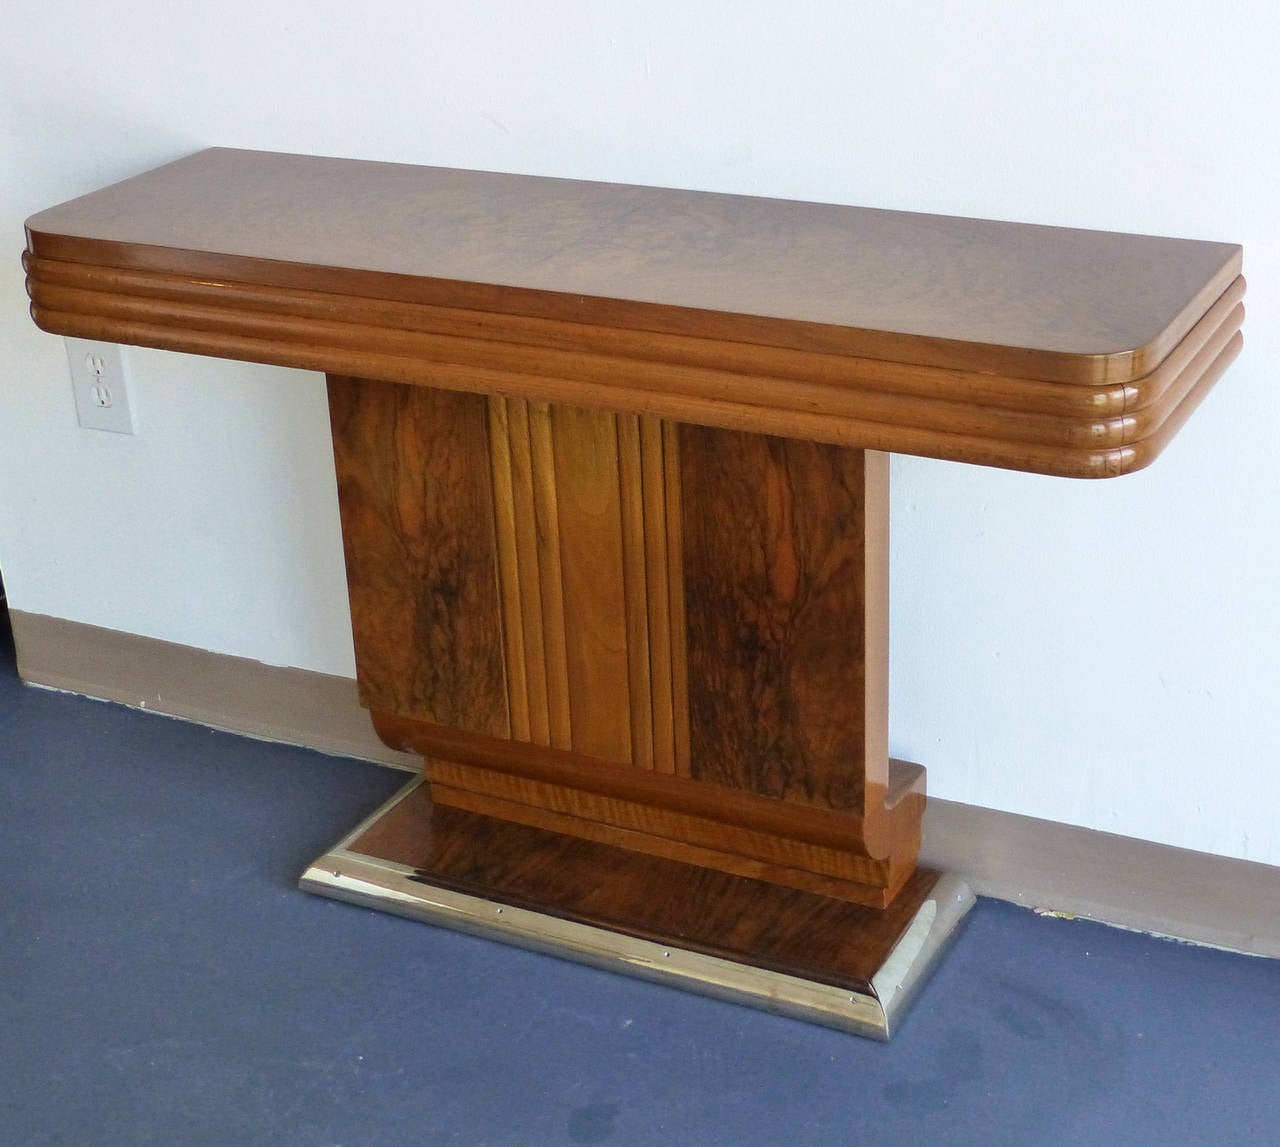 Fully art deco console in burl ob walnut. Chrome hardwares. Well balanced and original proportions.